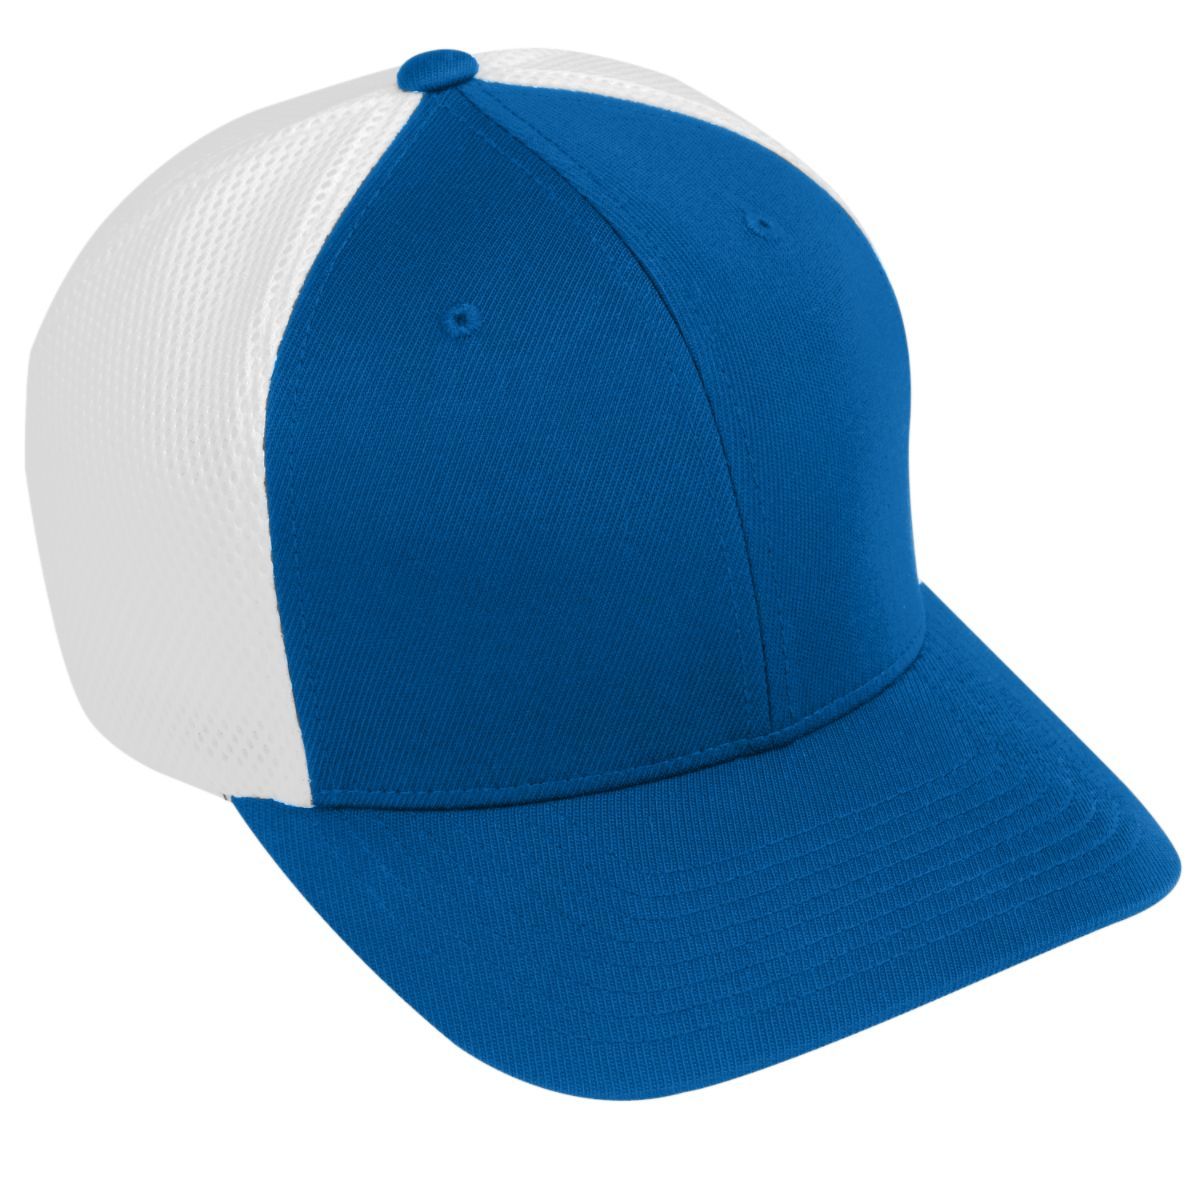 Augusta Sportswear Flexfit Vapor Cap in Royal/White  -Part of the Adult, Augusta-Products, Headwear, Headwear-Cap product lines at KanaleyCreations.com